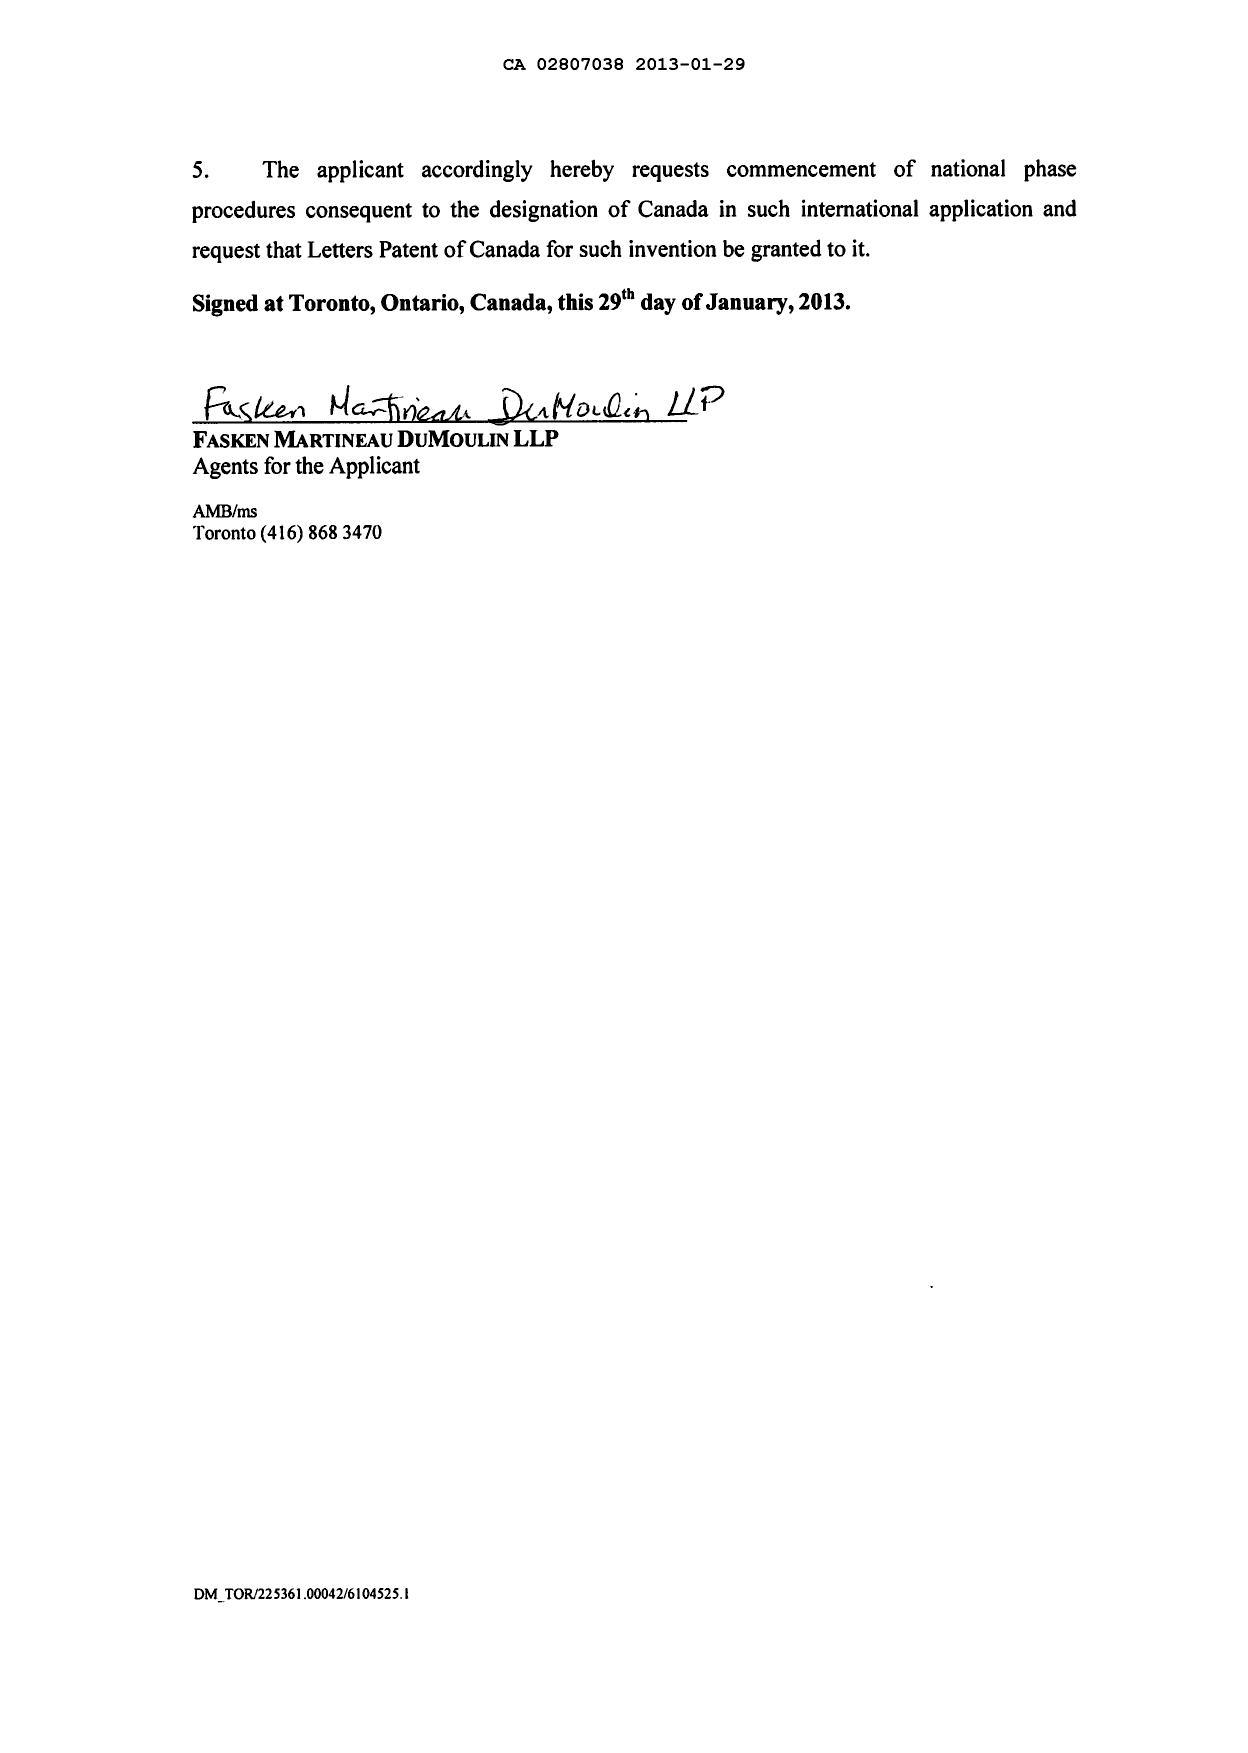 Canadian Patent Document 2807038. Assignment 20130129. Image 4 of 4